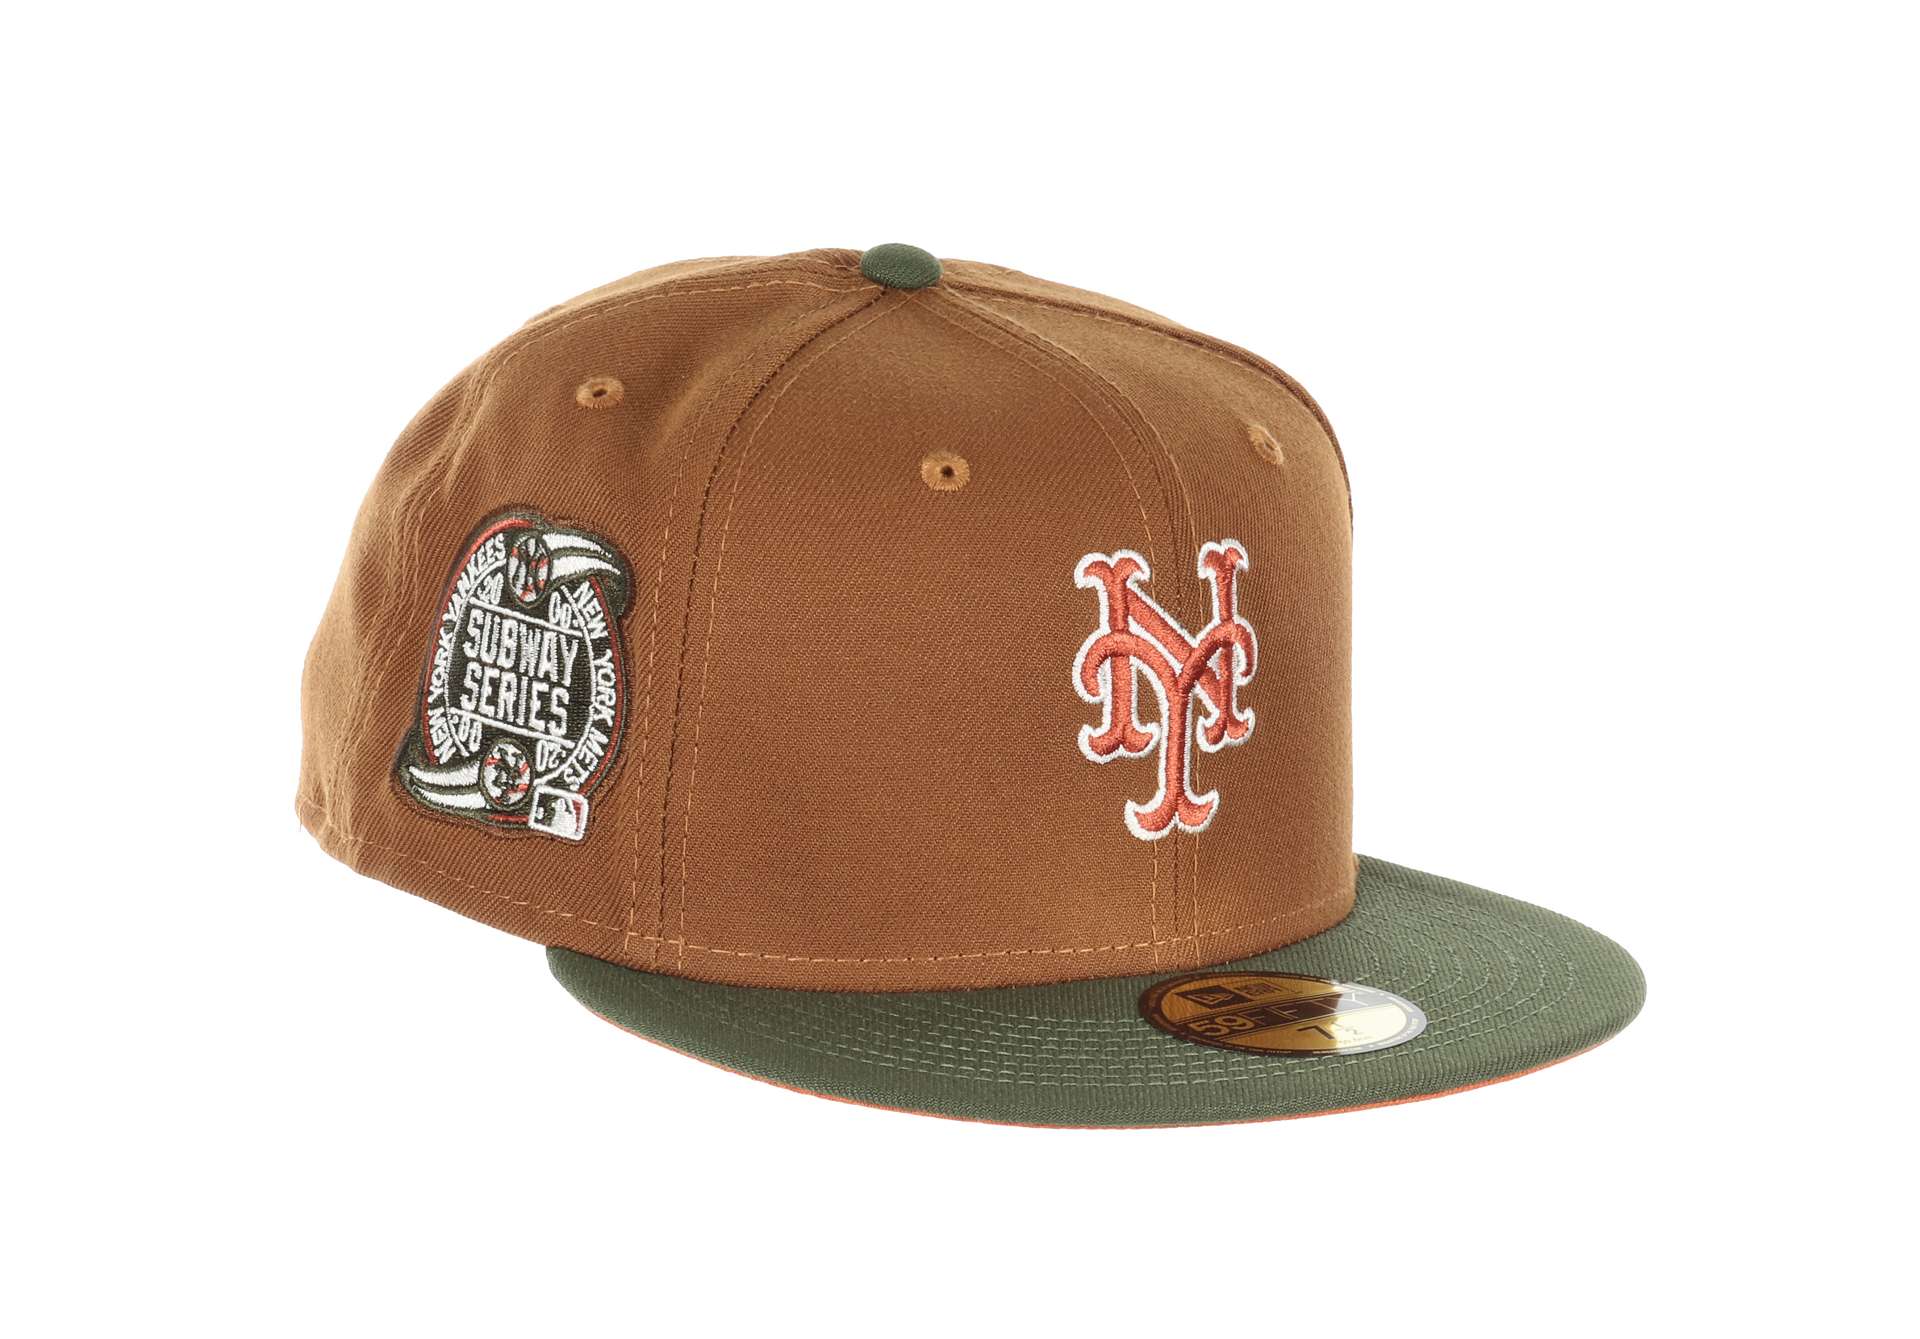 New York Mets MLB Cooperstown Subway Series Sidepatch Toasted Peanut 59Fifty Basecap New Era